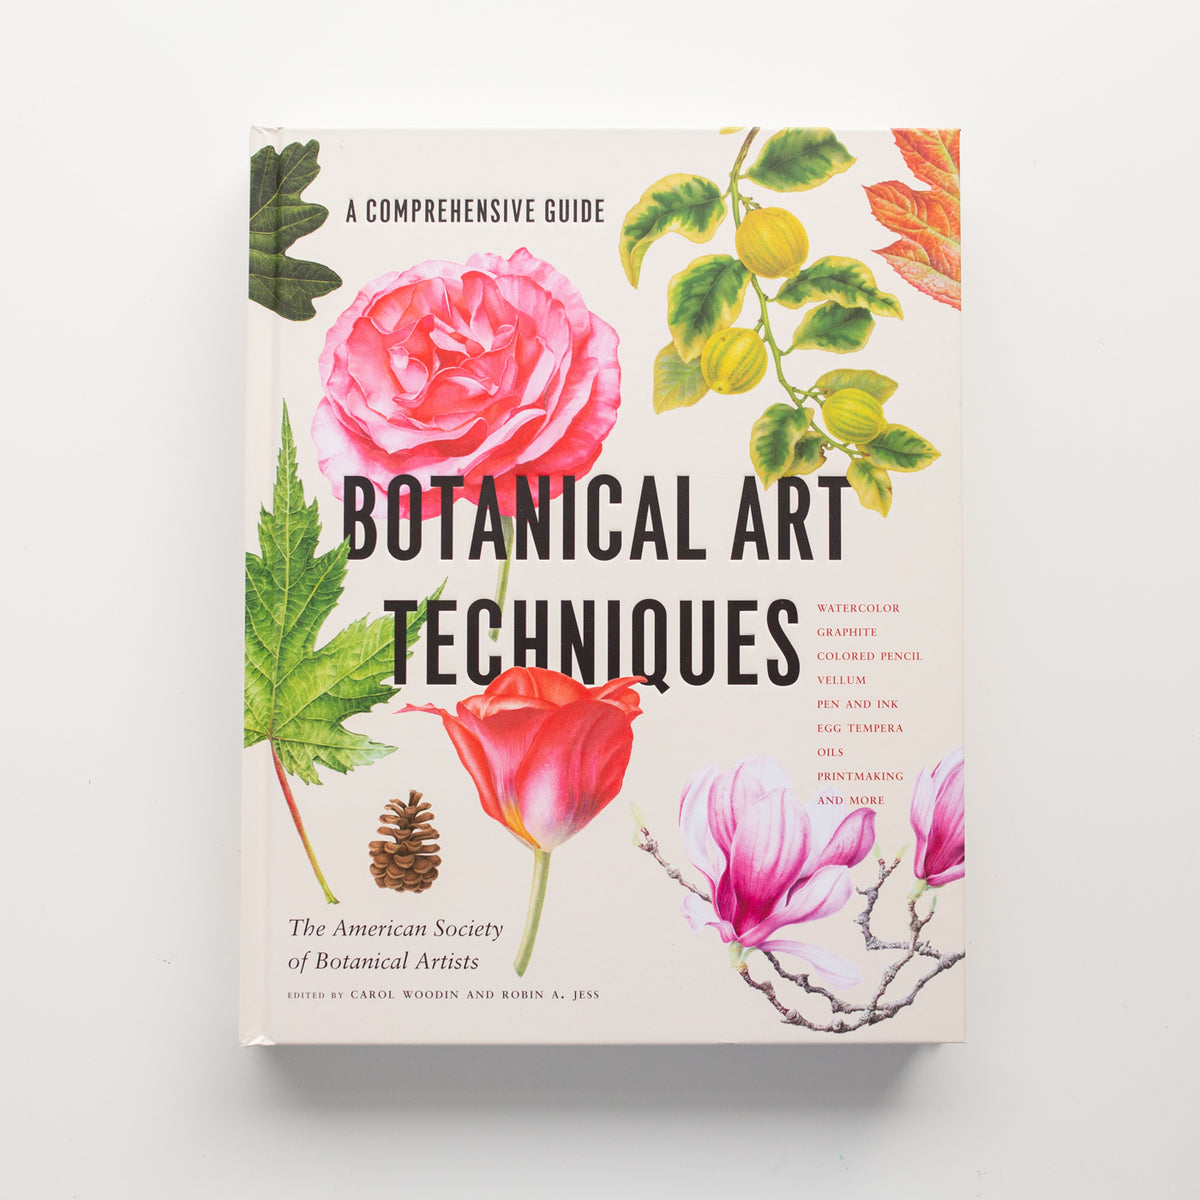 Botanical Art Techniques by The American Society of Botanical Artists